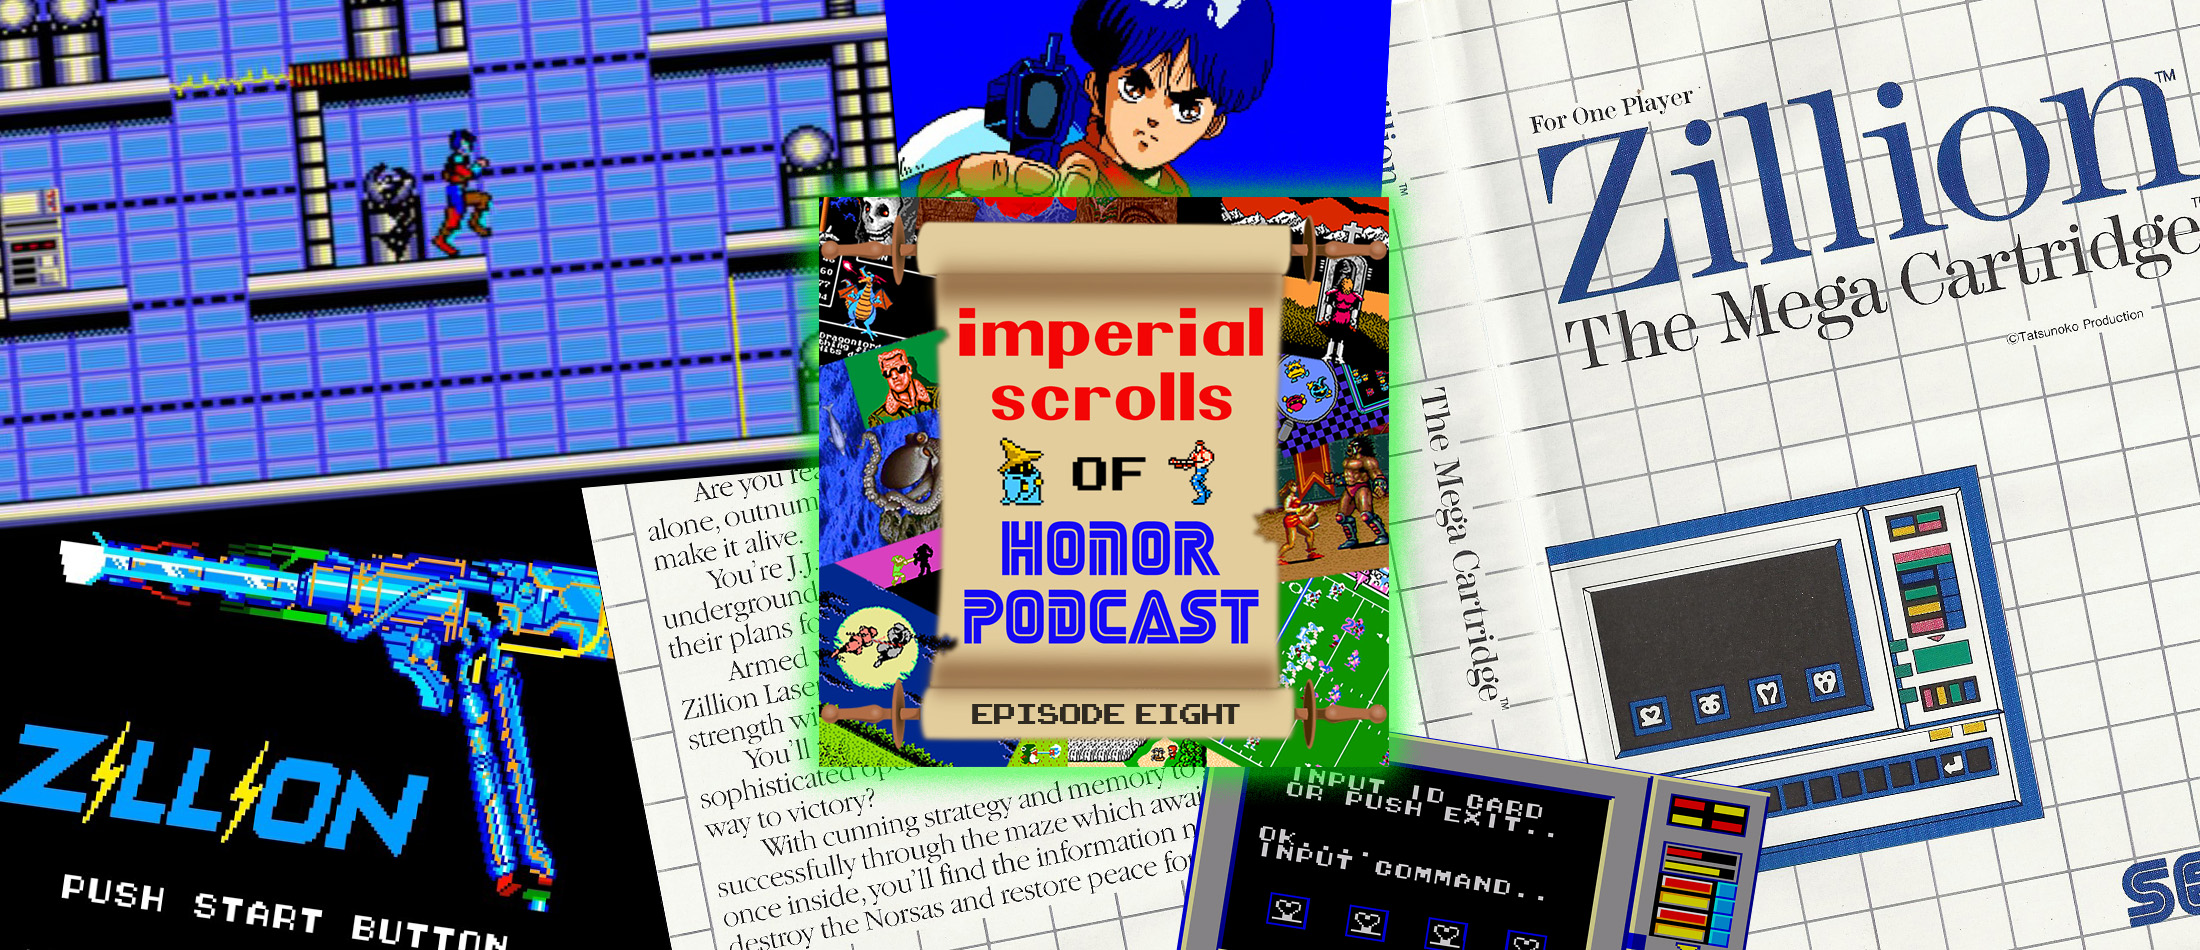 Imperial Scrolls of Honor Podcast - Episode 8 - Zillion (SMS)